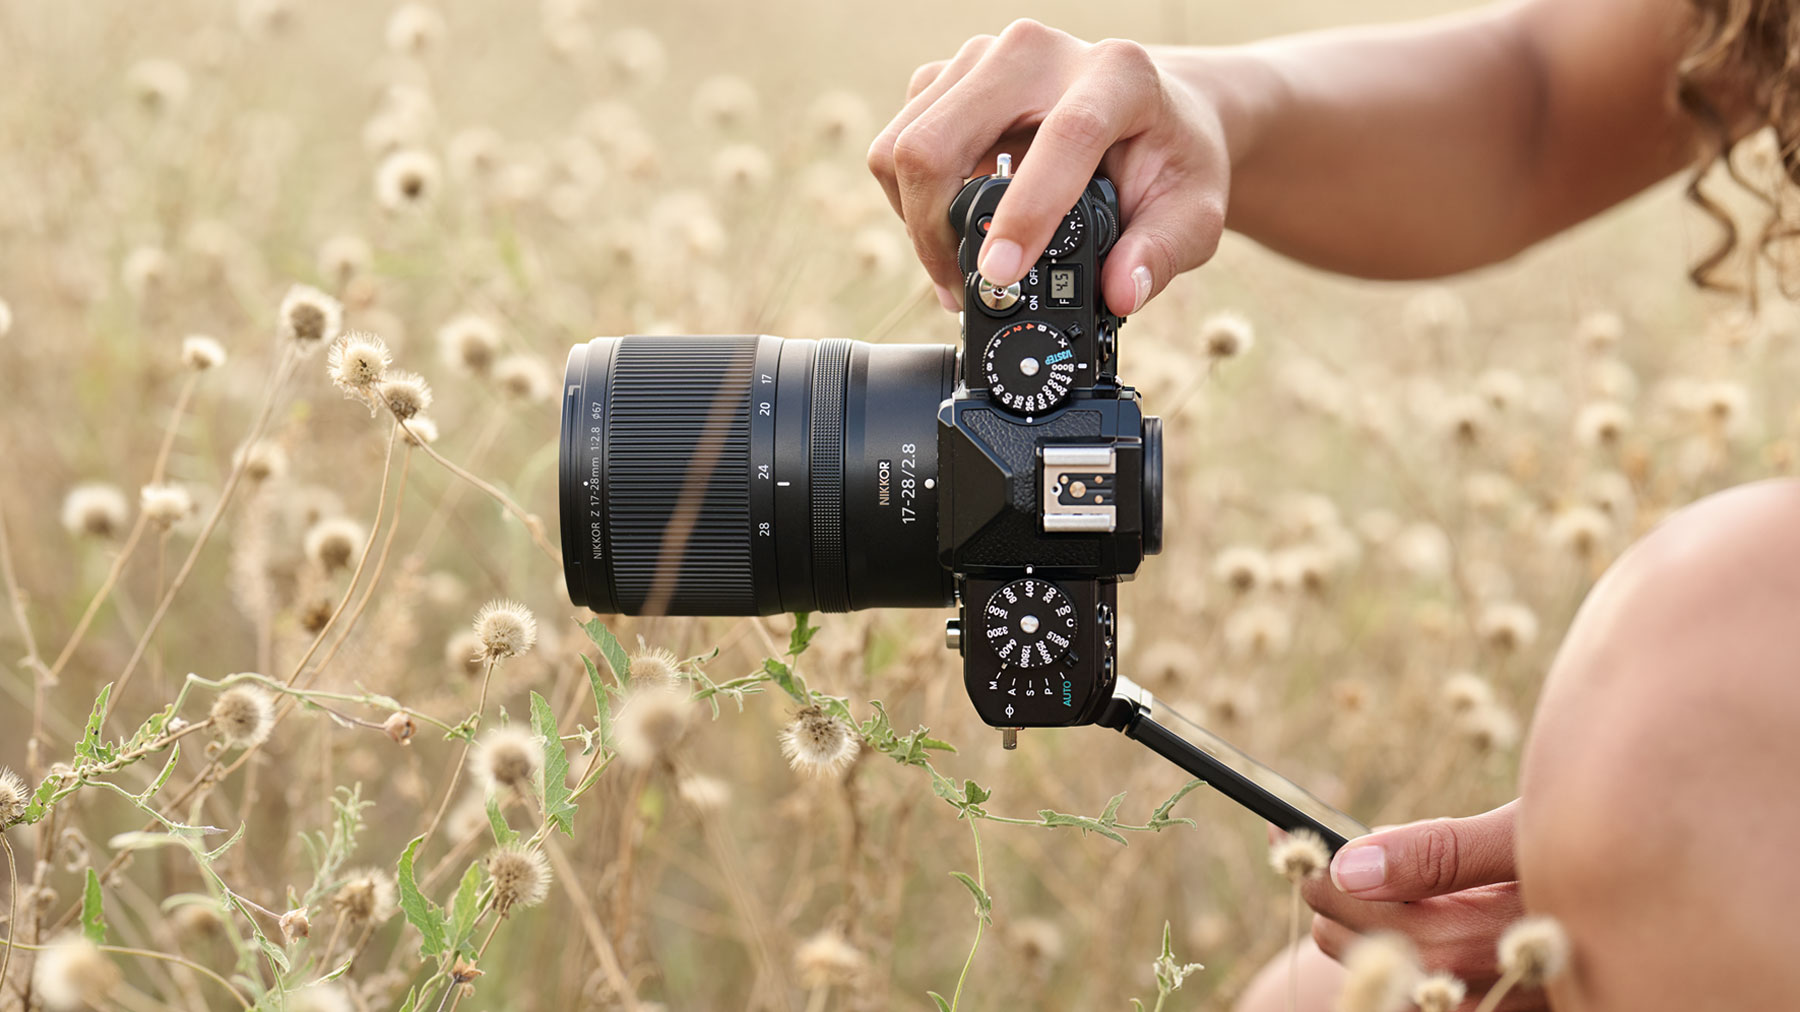 Photo of a person holding the Z f camera and lens, with the LCD flipped out, in a field of out of focus flowers